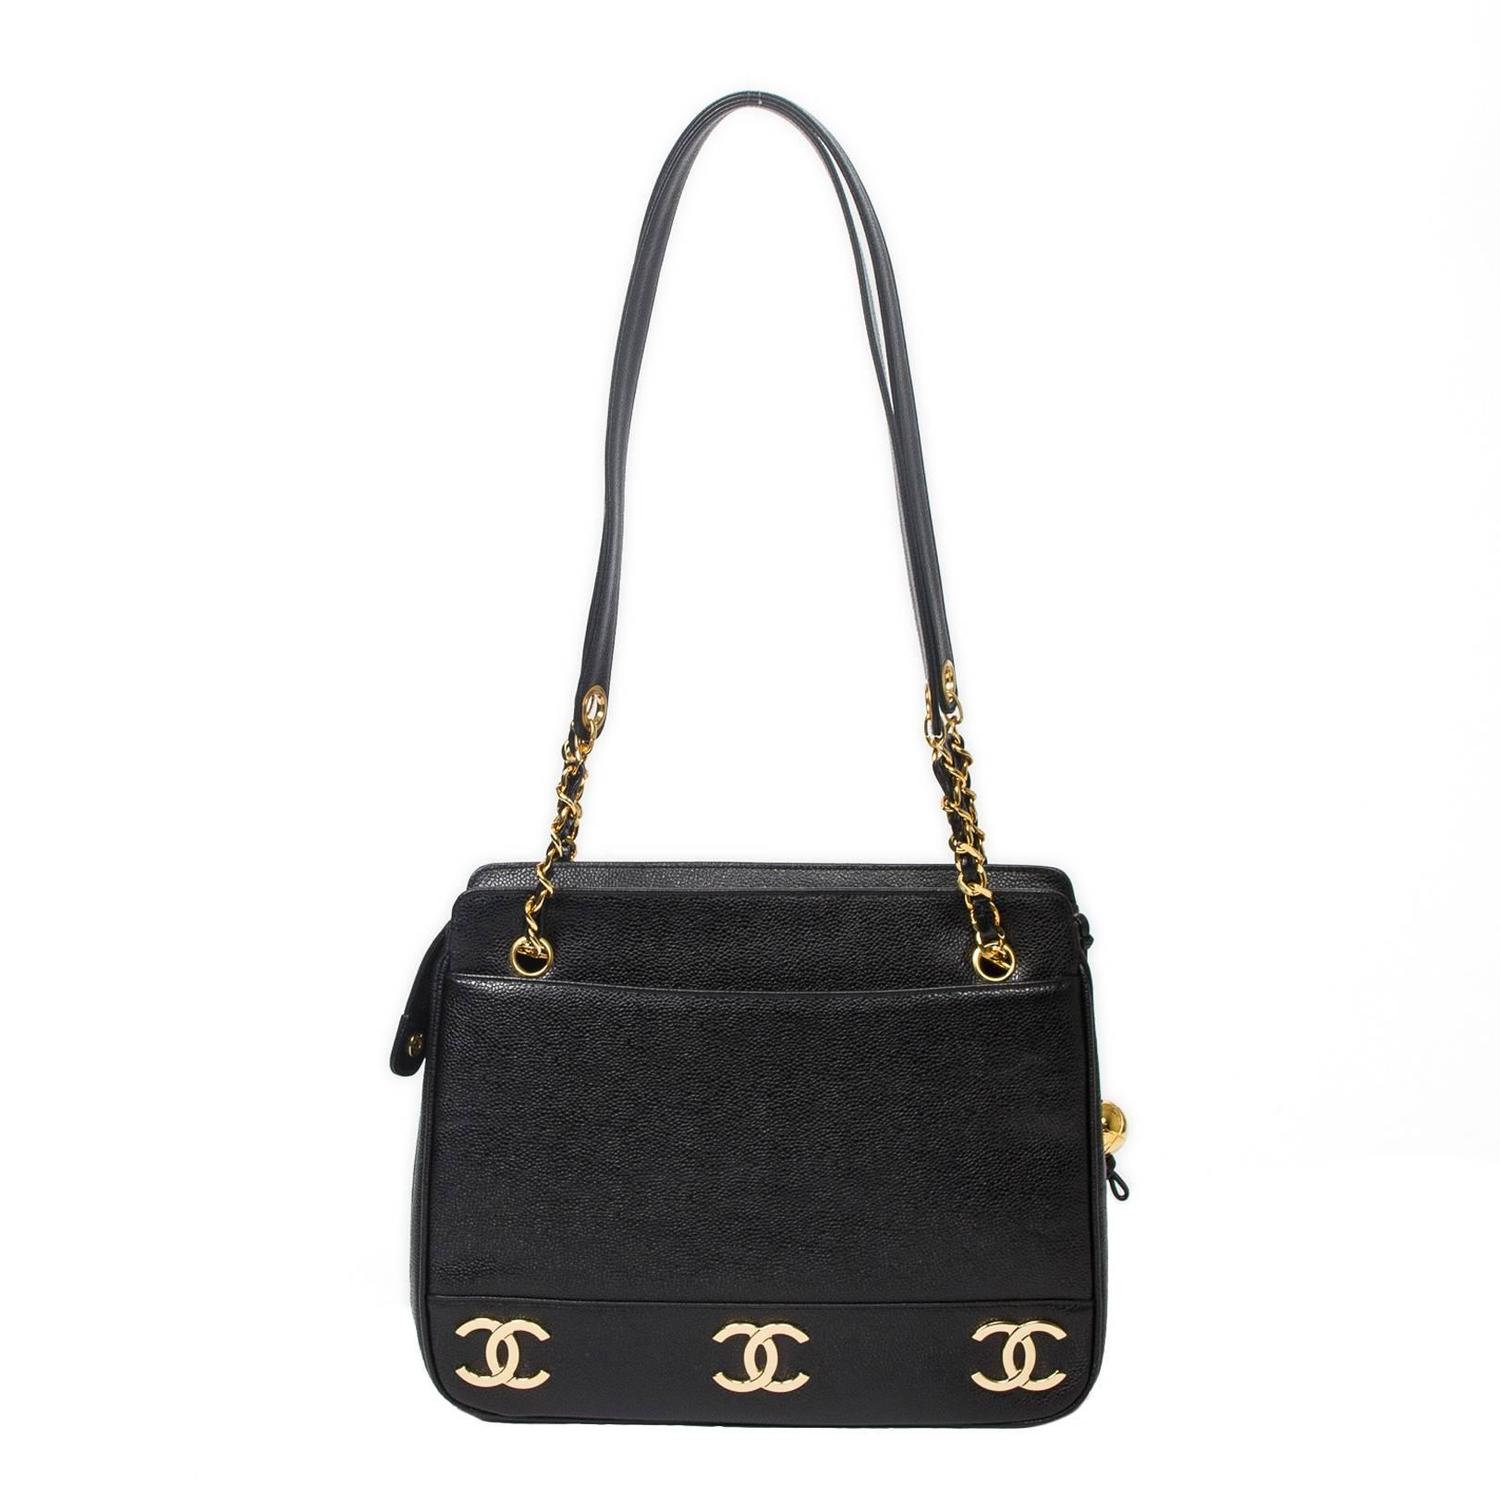 Where To Buy Chanel Handbags In Ireland | Confederated Tribes of the Umatilla Indian Reservation